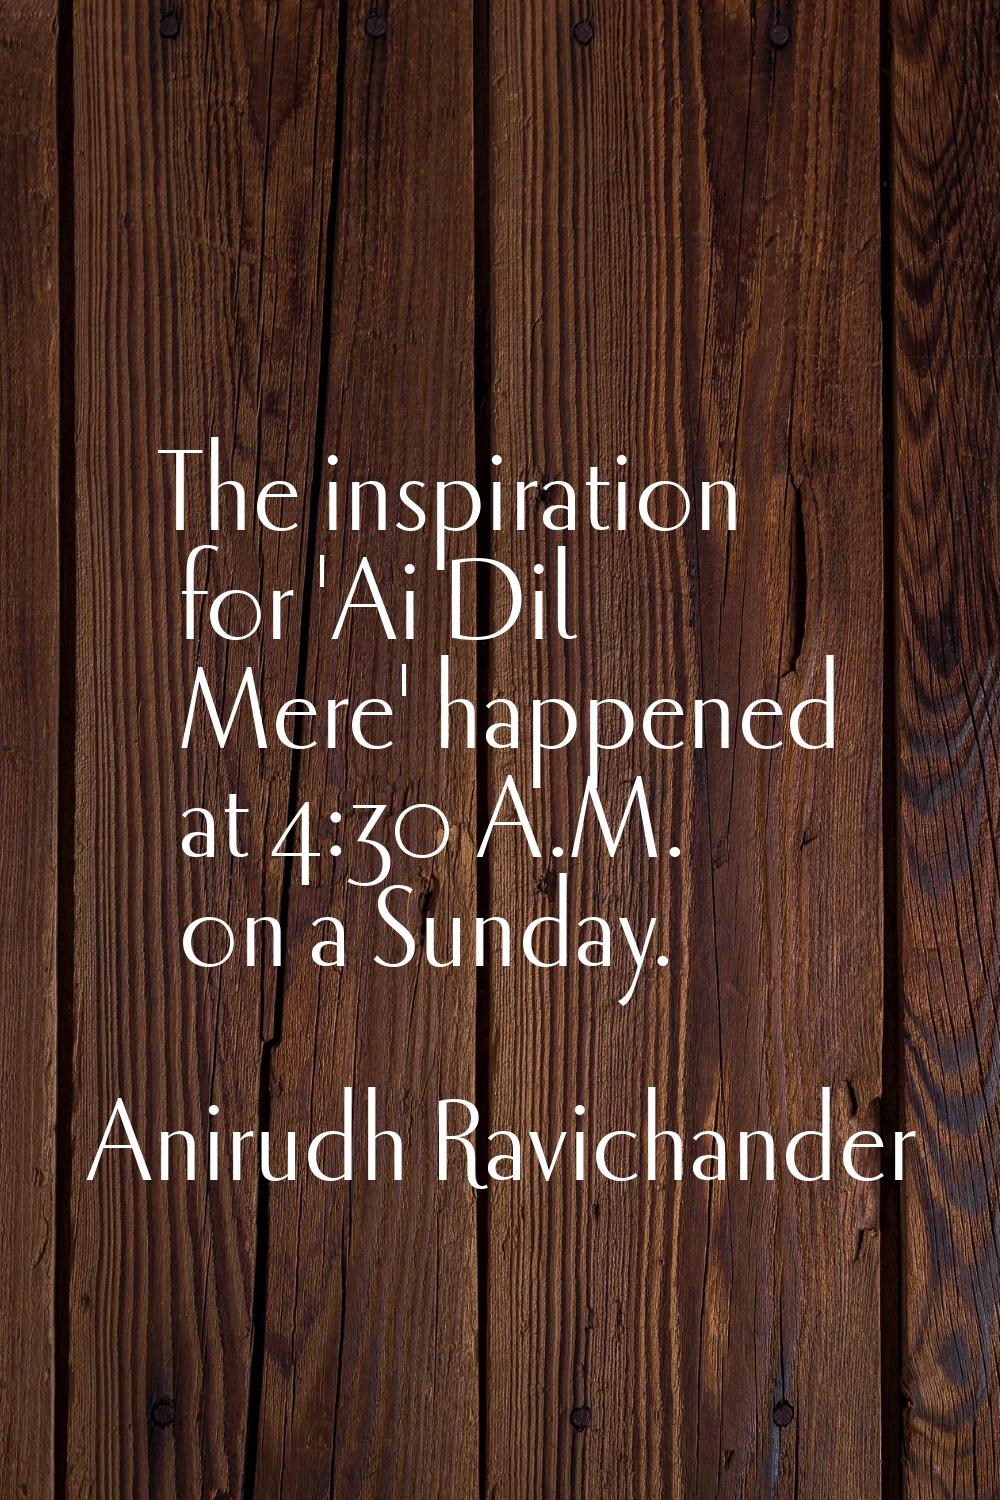 The inspiration for 'Ai Dil Mere' happened at 4:30 A.M. on a Sunday.